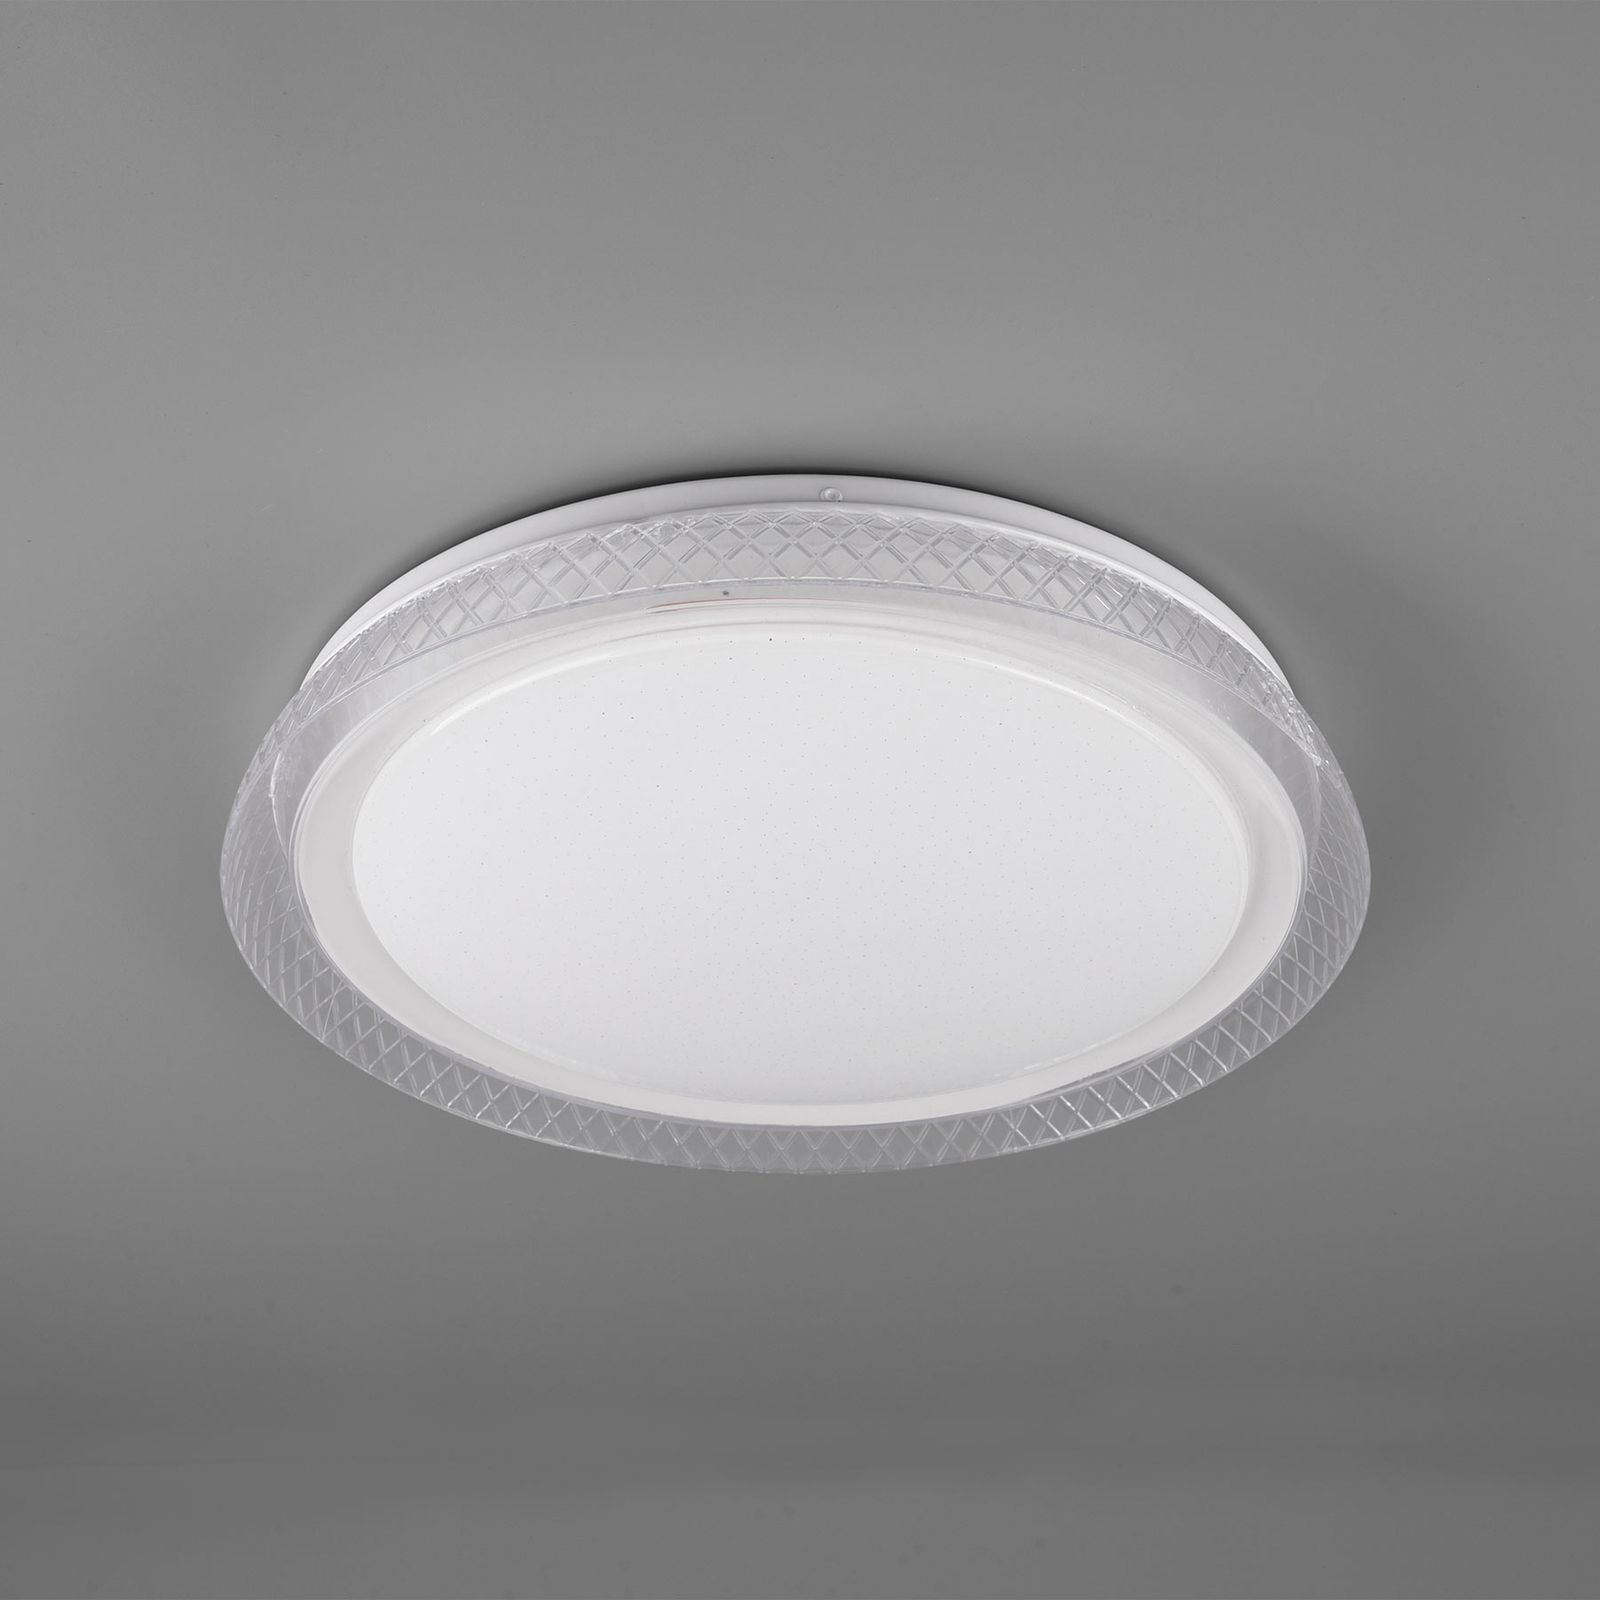 LED-taklampe Heracles, tunable white, Ø 38 cm